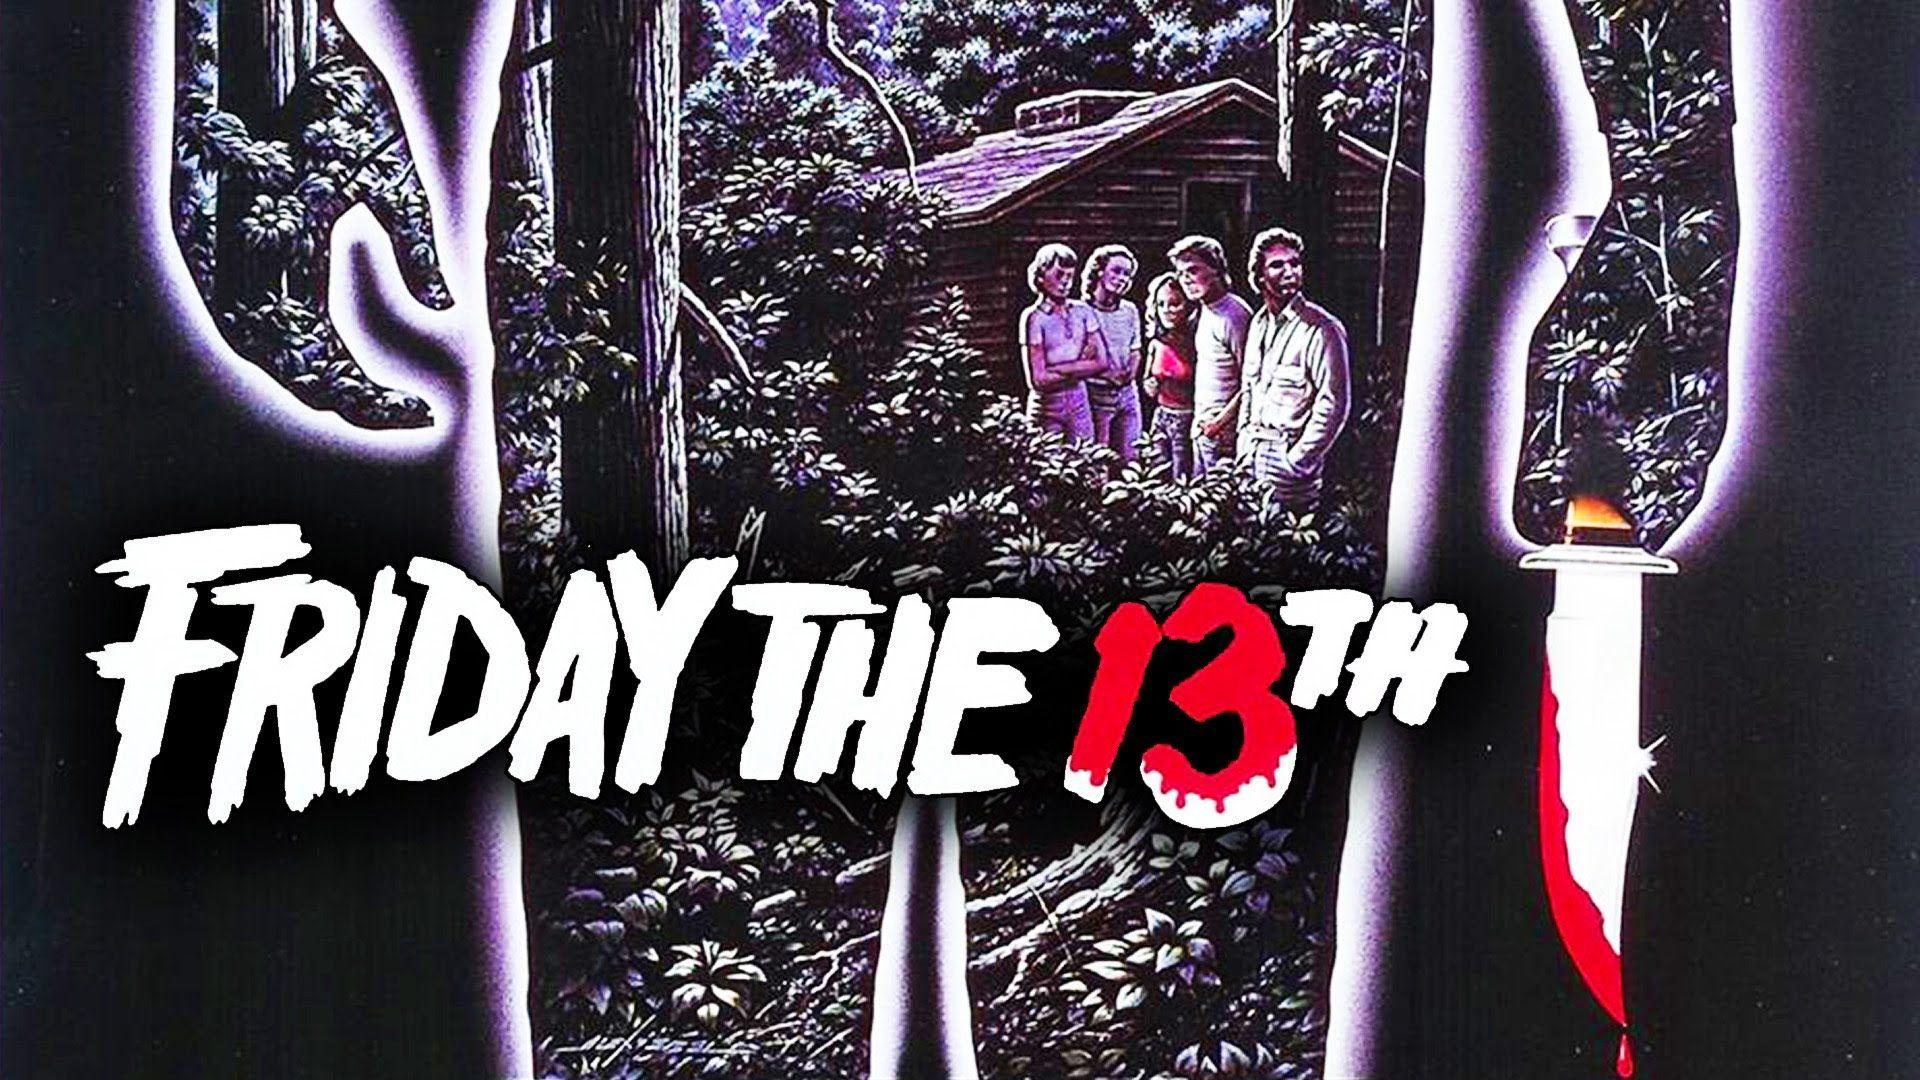 990x1500px Friday The 13Th 1980 (300.84 KB).08.2015